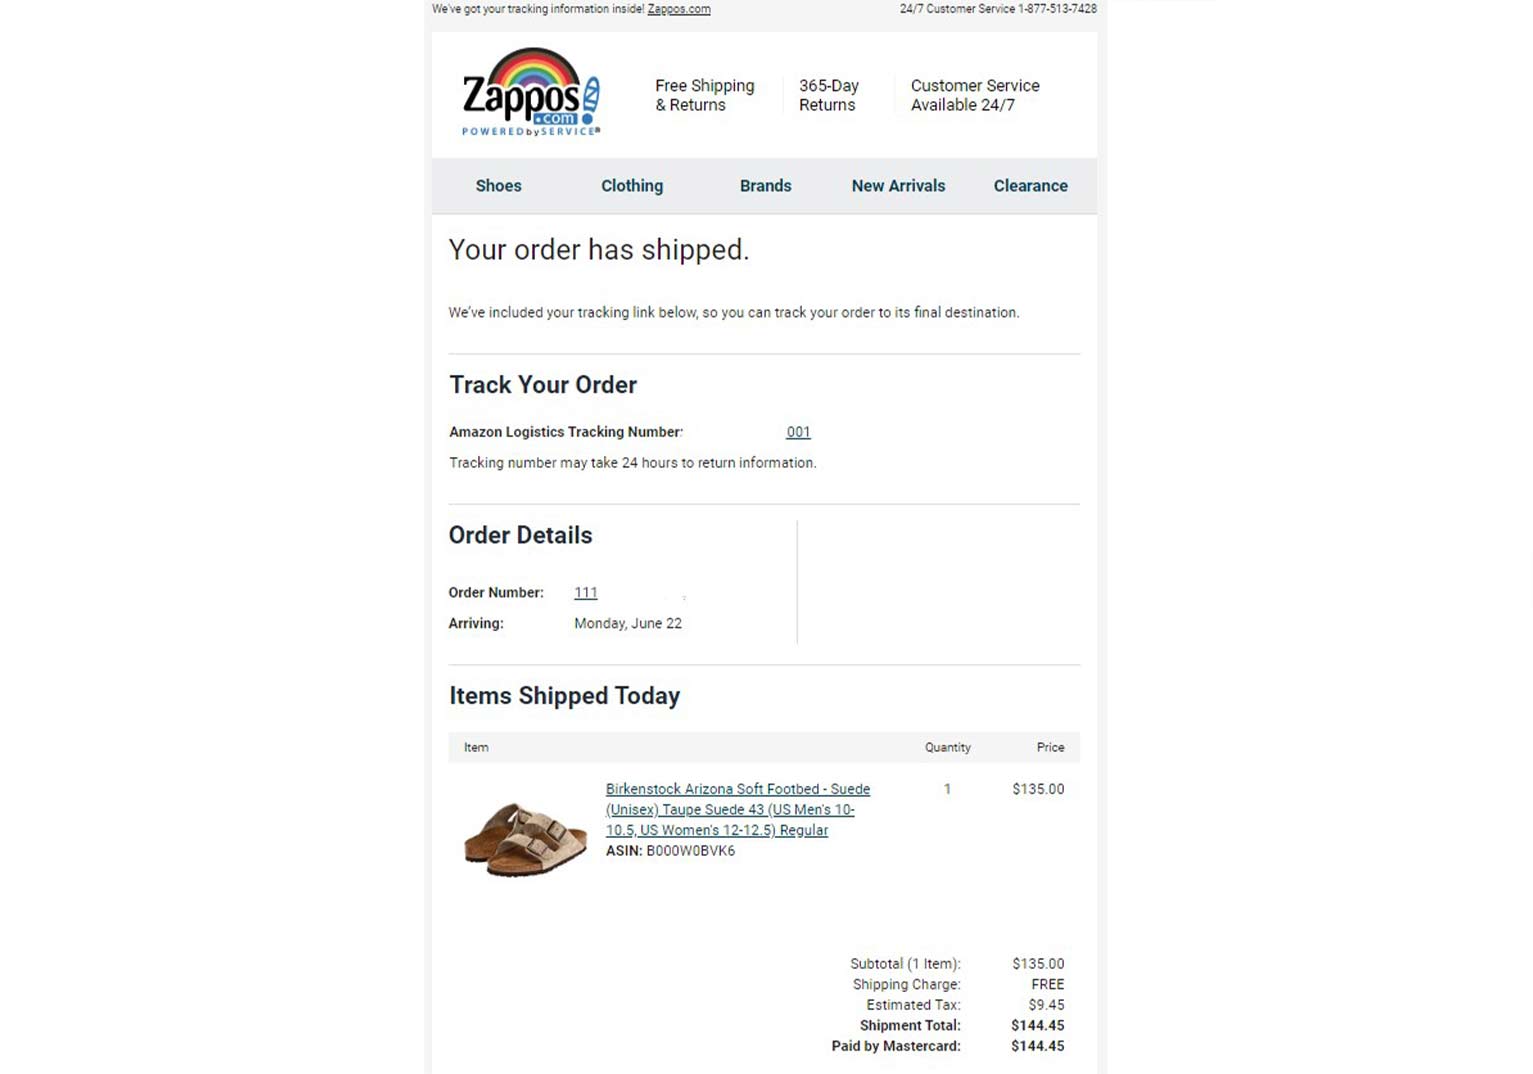 Order shipment notification email from Zappos, showing the order name, image of item, price and link to track the order.